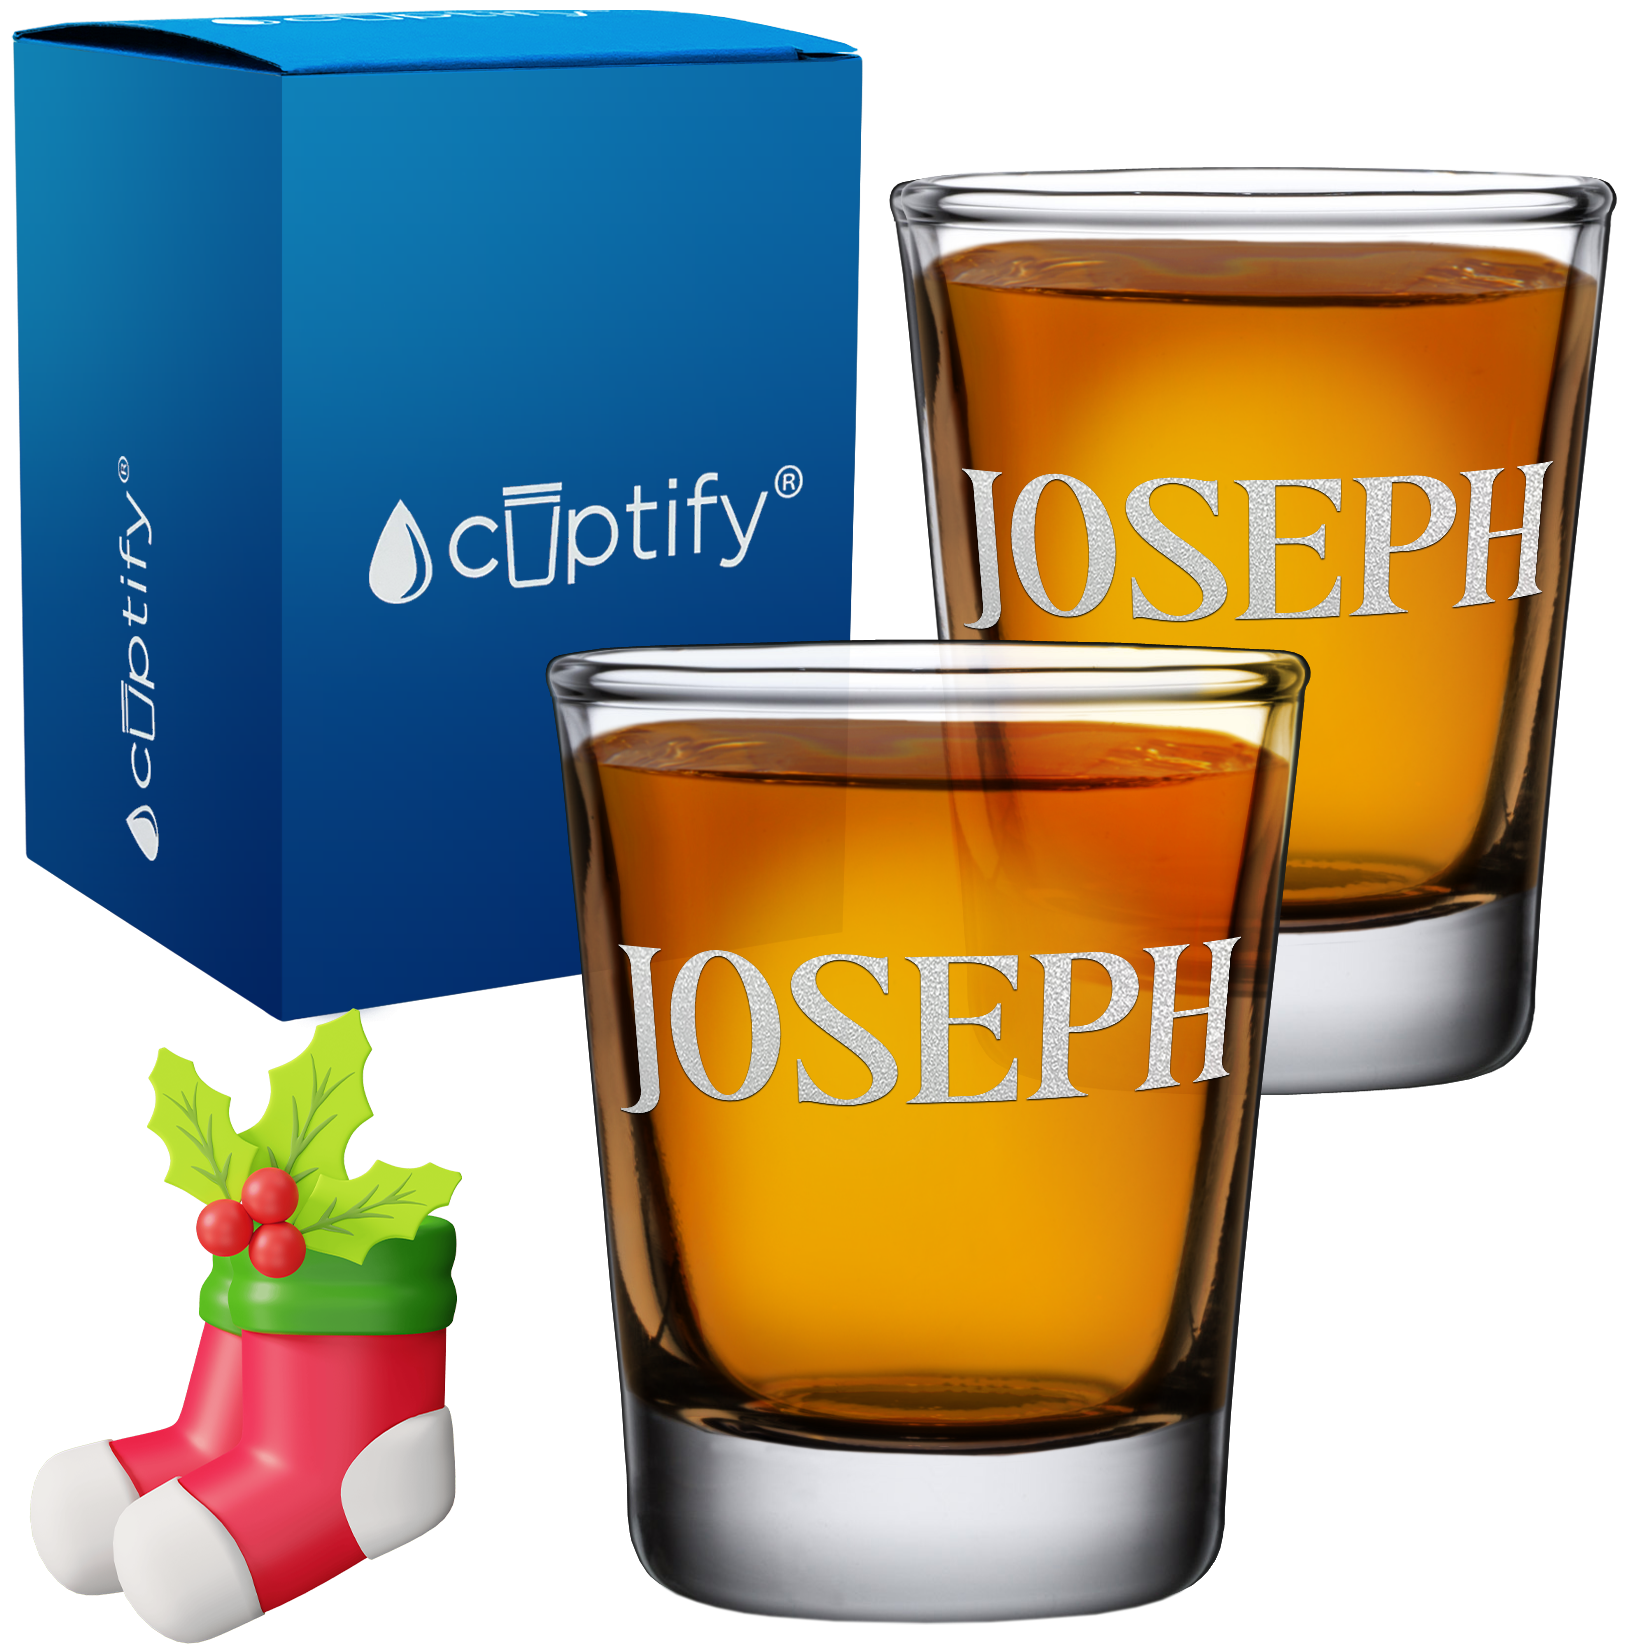 Personalized Merry Christmas Font 2oz Shot Glasses - Set of 2